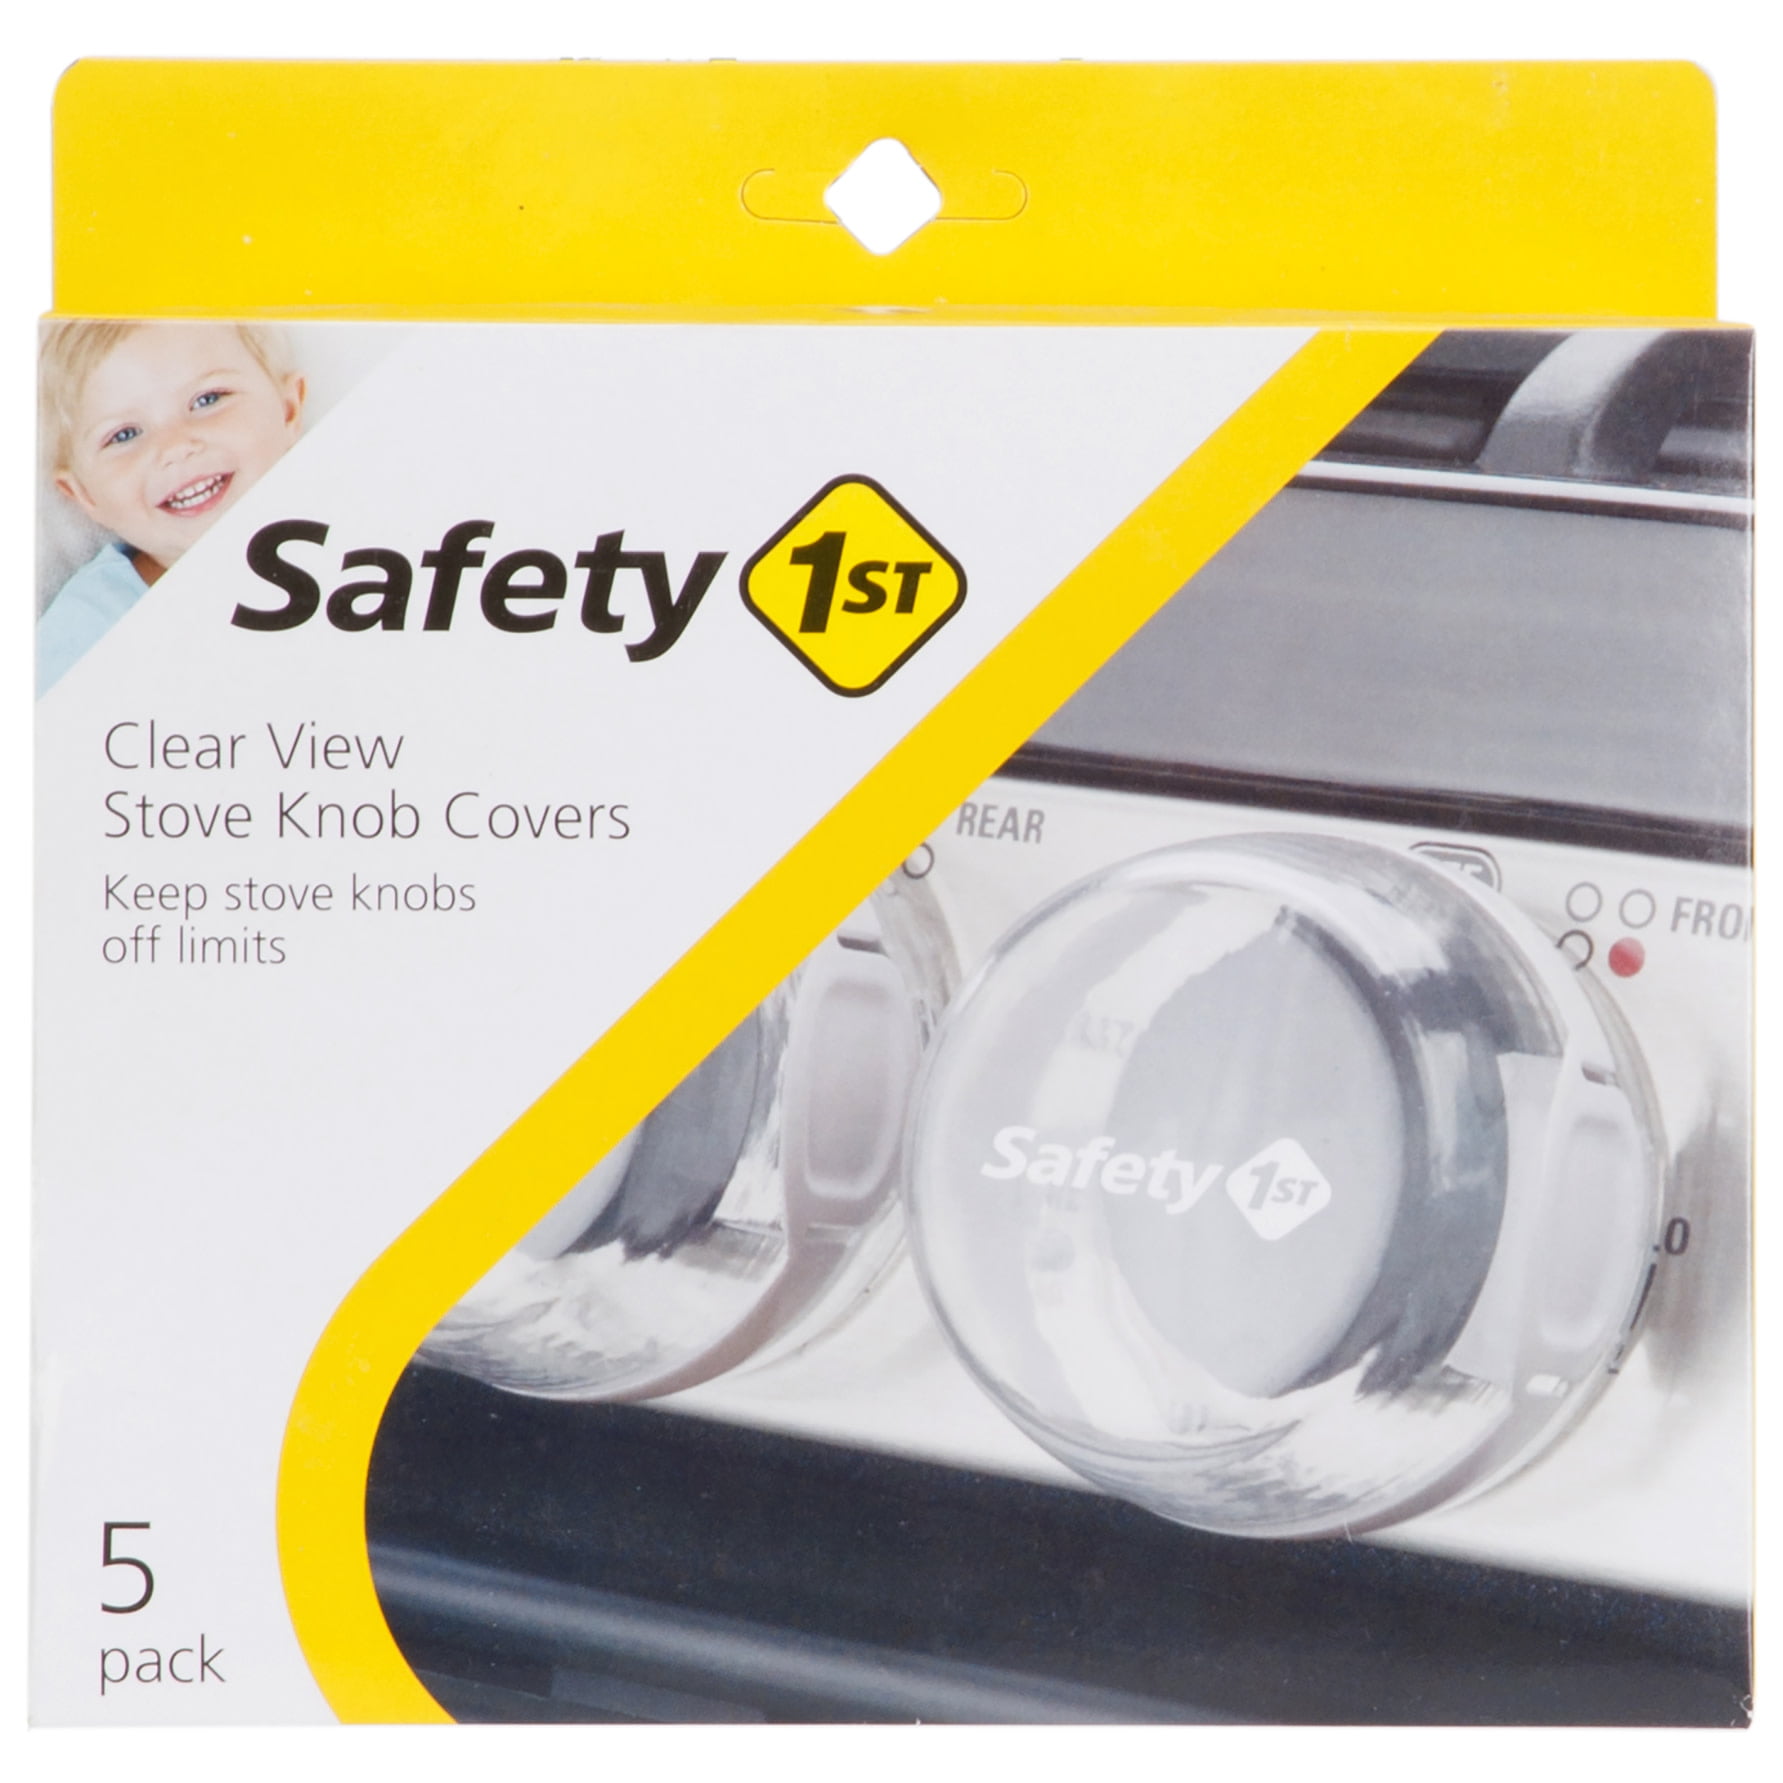 Safety 1st 48409 Clear View Stove Knob Covers 5 Count 